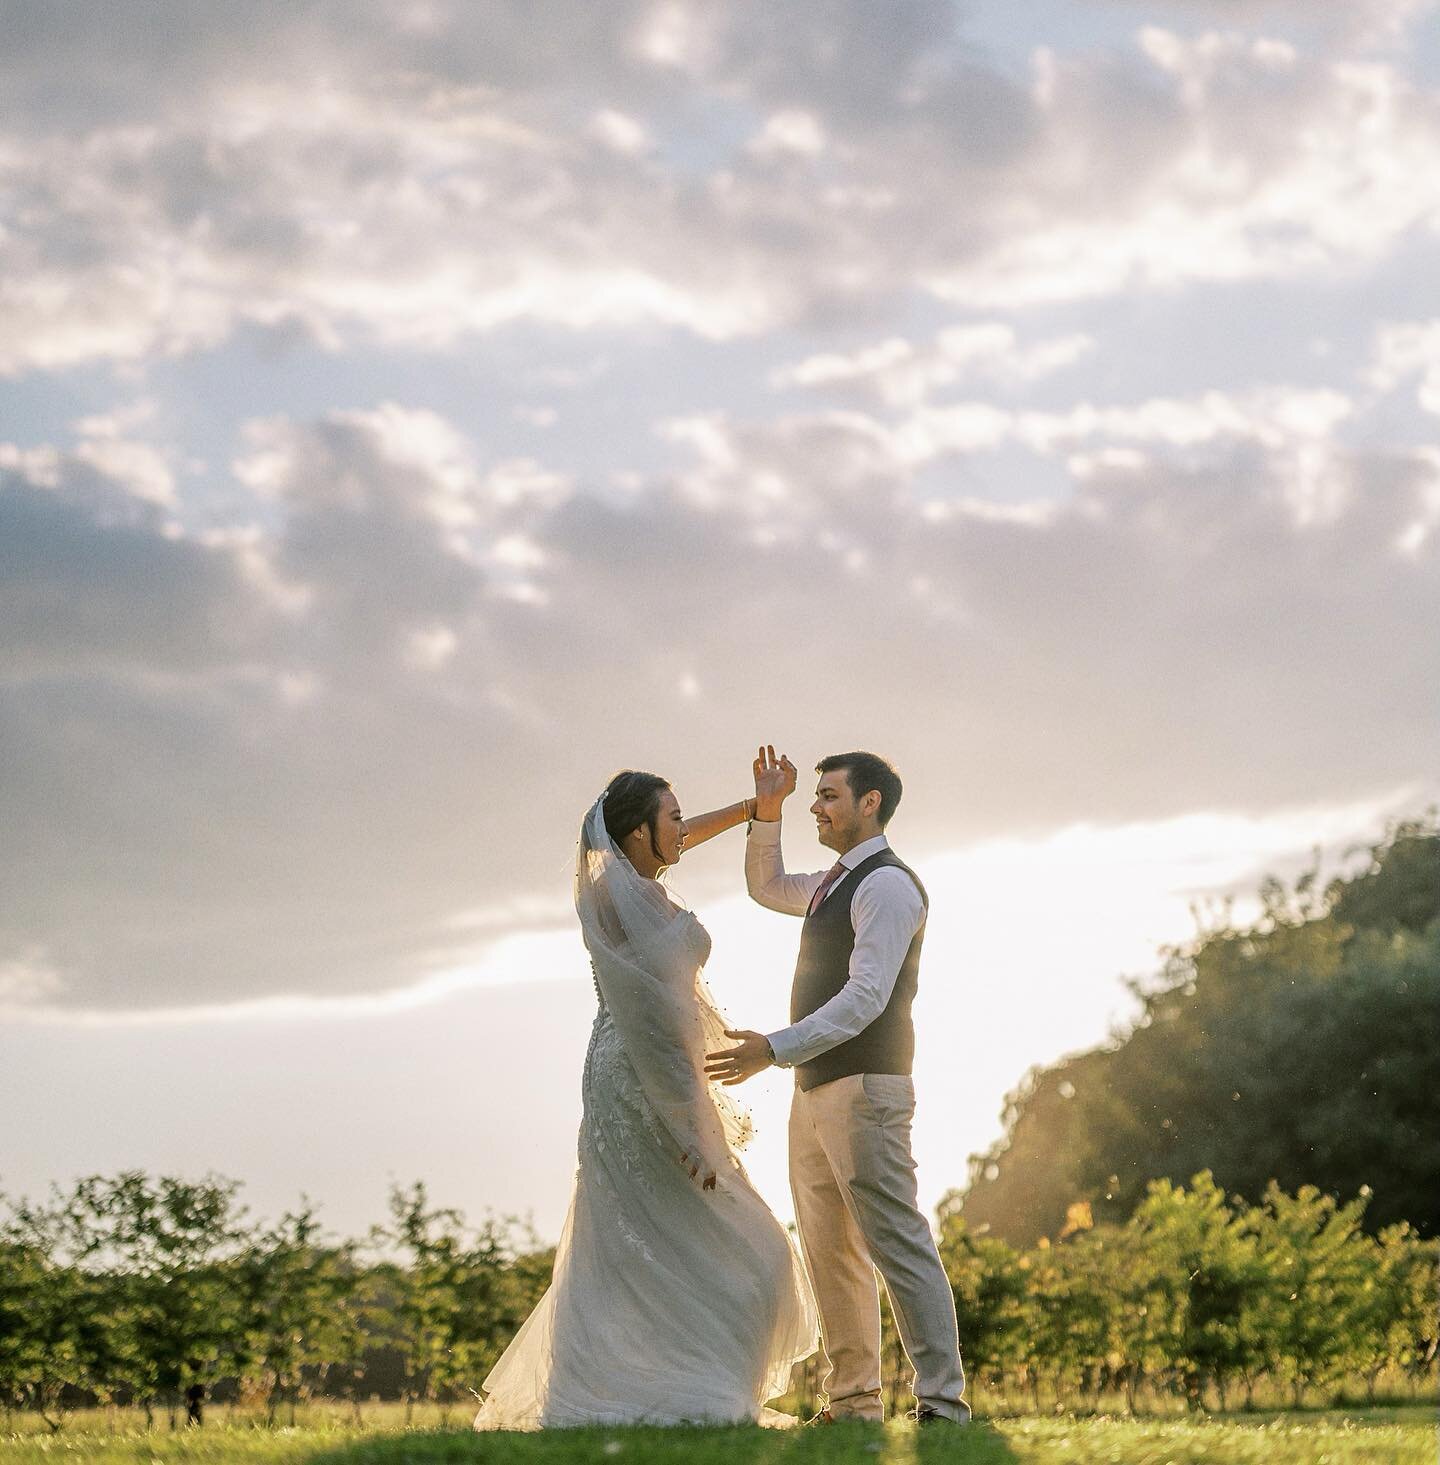 Summer sun, stunning venue and a gorgeous happy couple - my job is easy sometimes! Here are a few captures from the wedding of the lovely Faye and Jack 💕
@hazelgapbarn 
@crippsandco @faye_siow 
.
.
.
.
.
.
.

 #2024wedding #2025wedding&nbsp;
#weddin